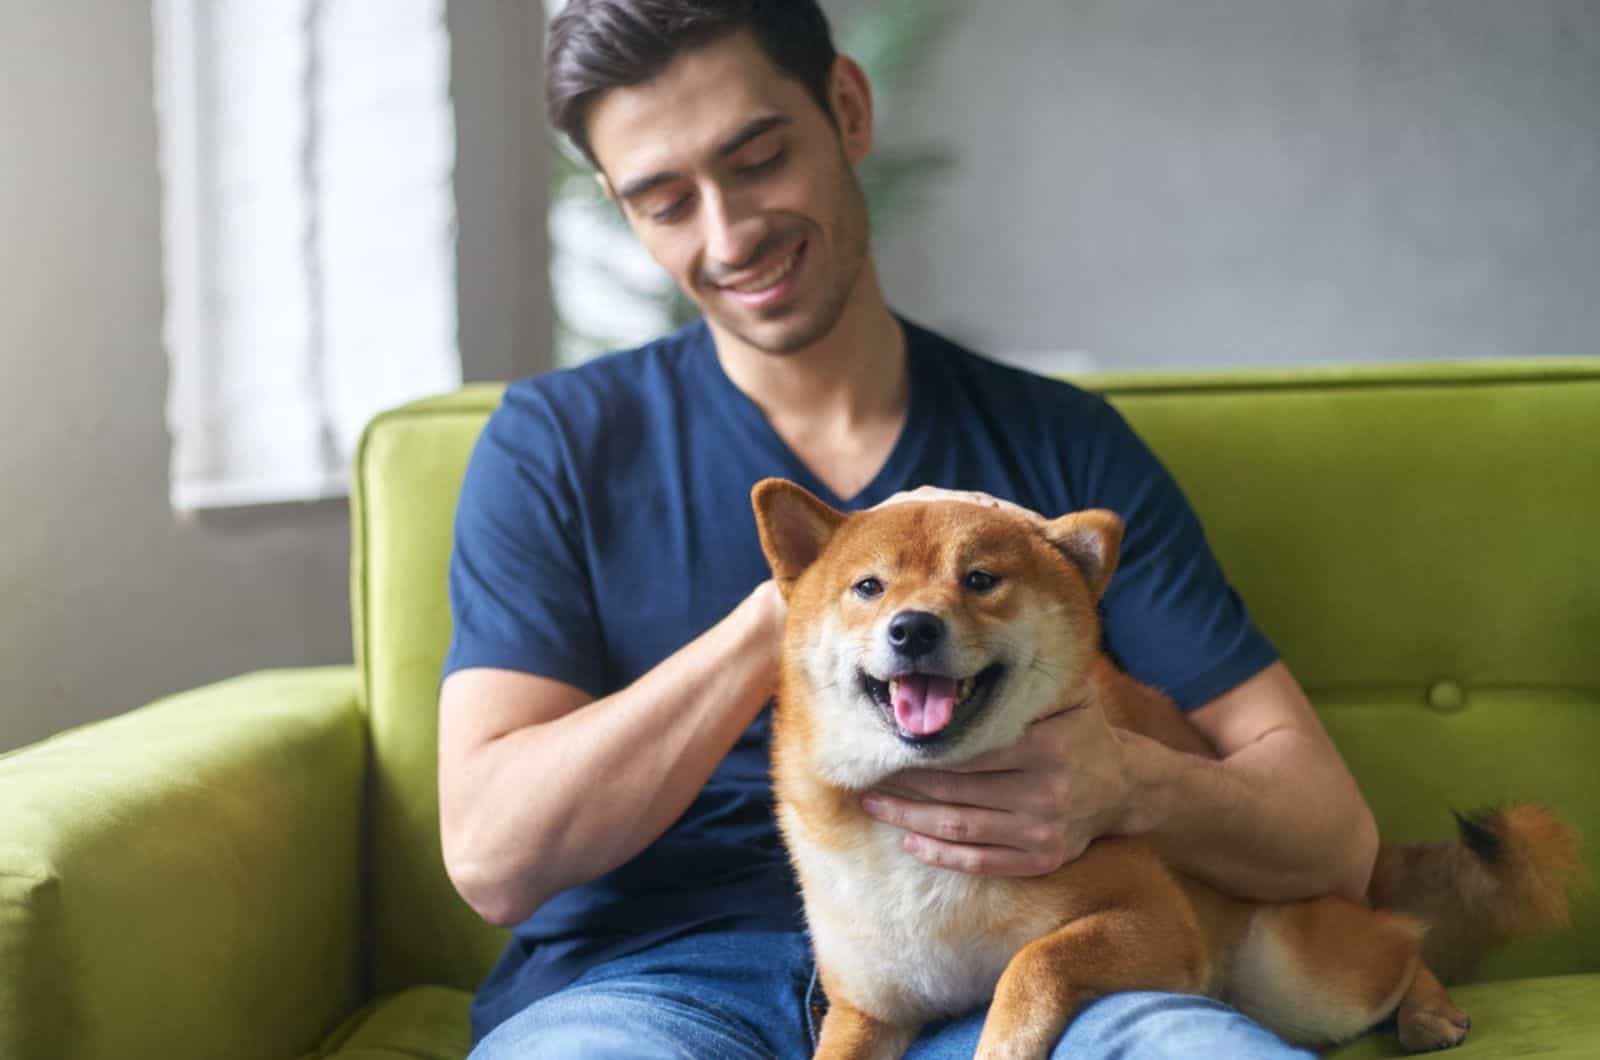 guy petting his dog shiba inu on the couch